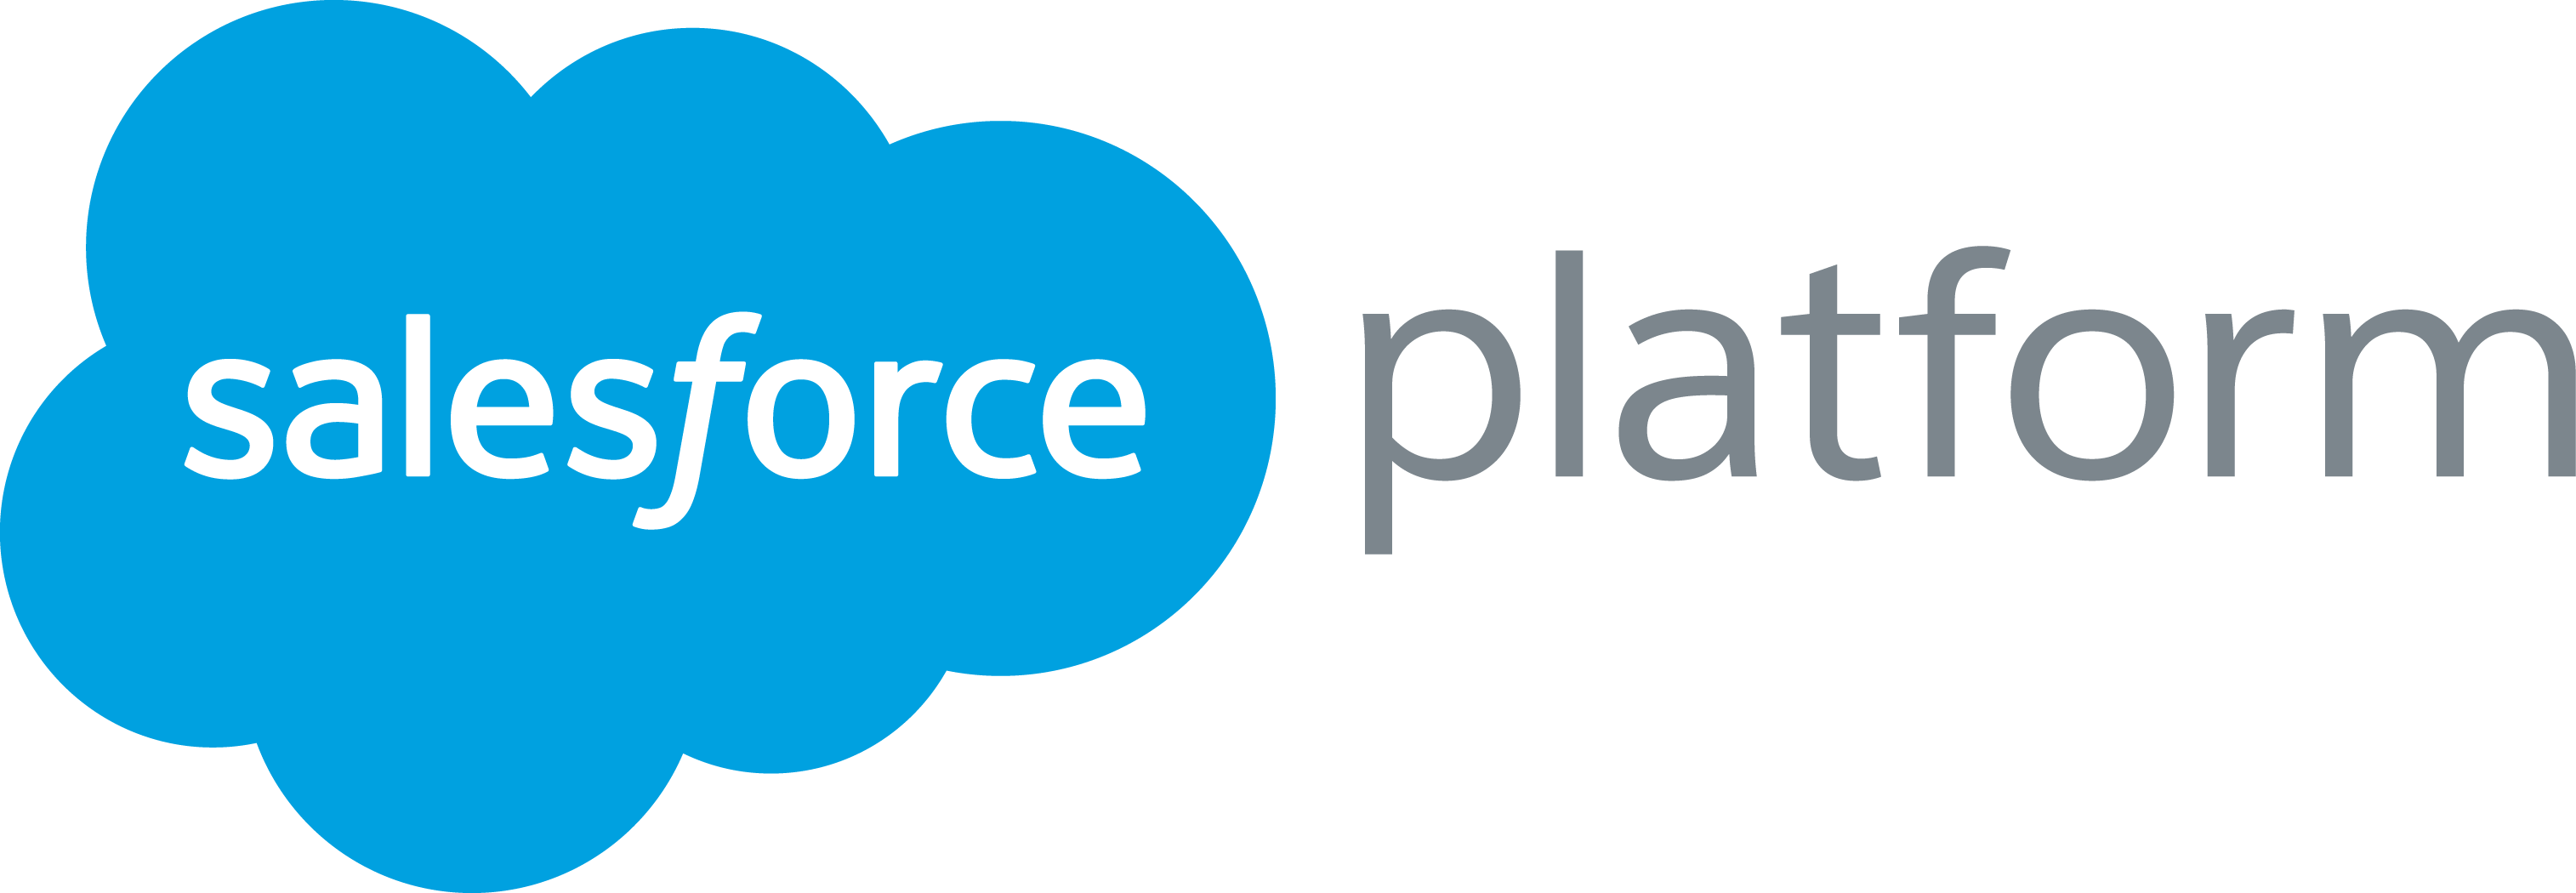 Salesforce: cloud giant grants users access to all data